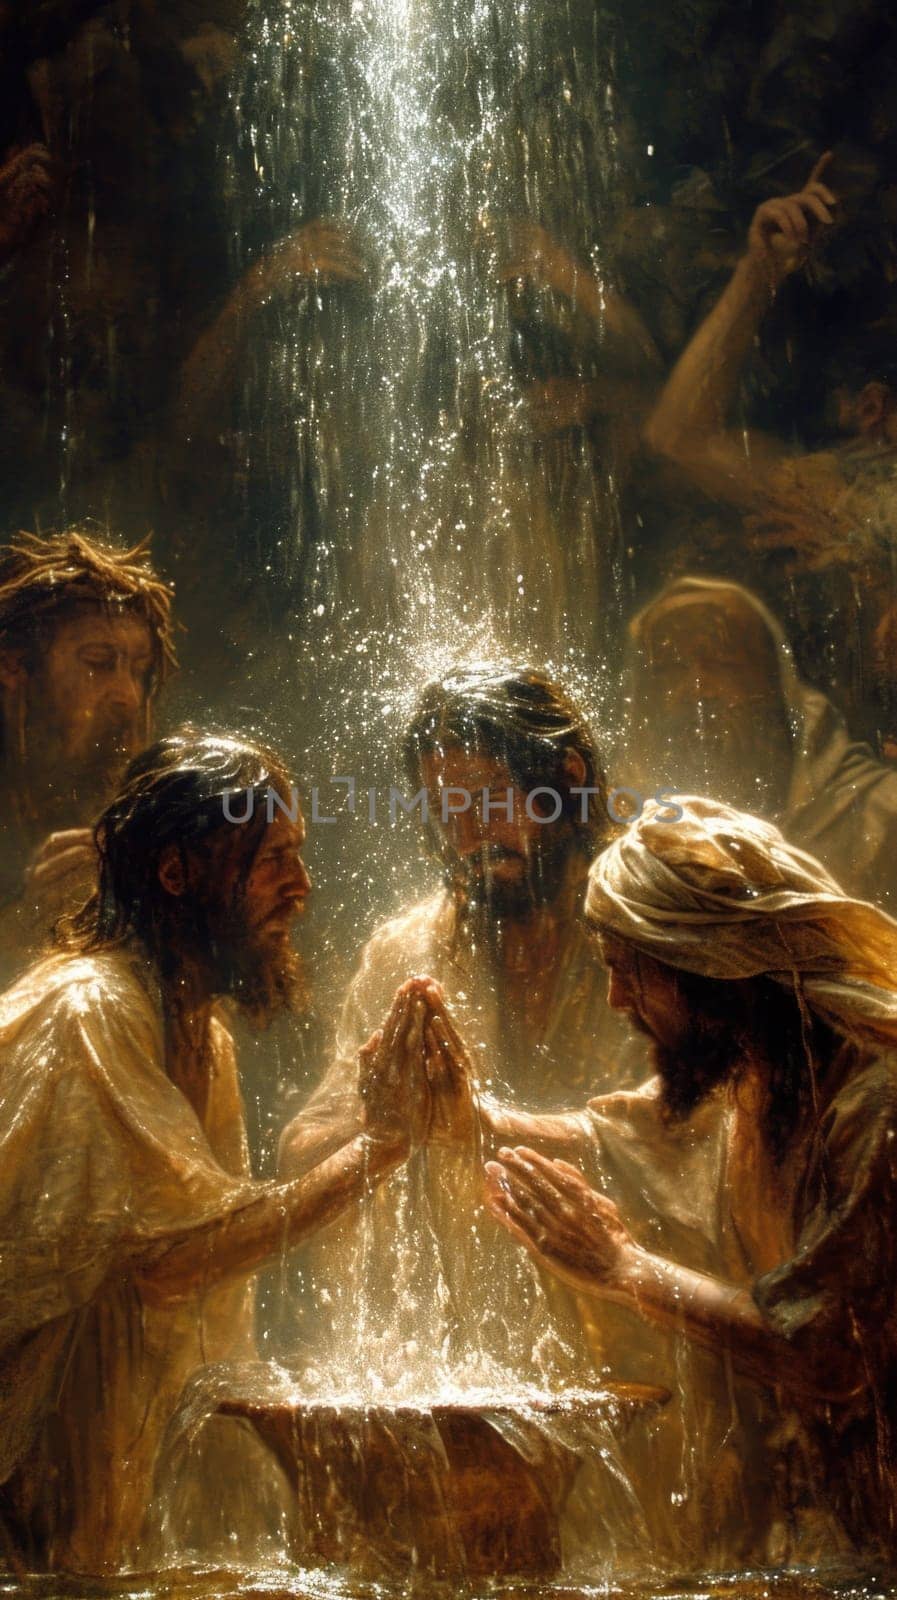 A depiction of Jesus performing baptism in a pond, as he washes his hands in the water.